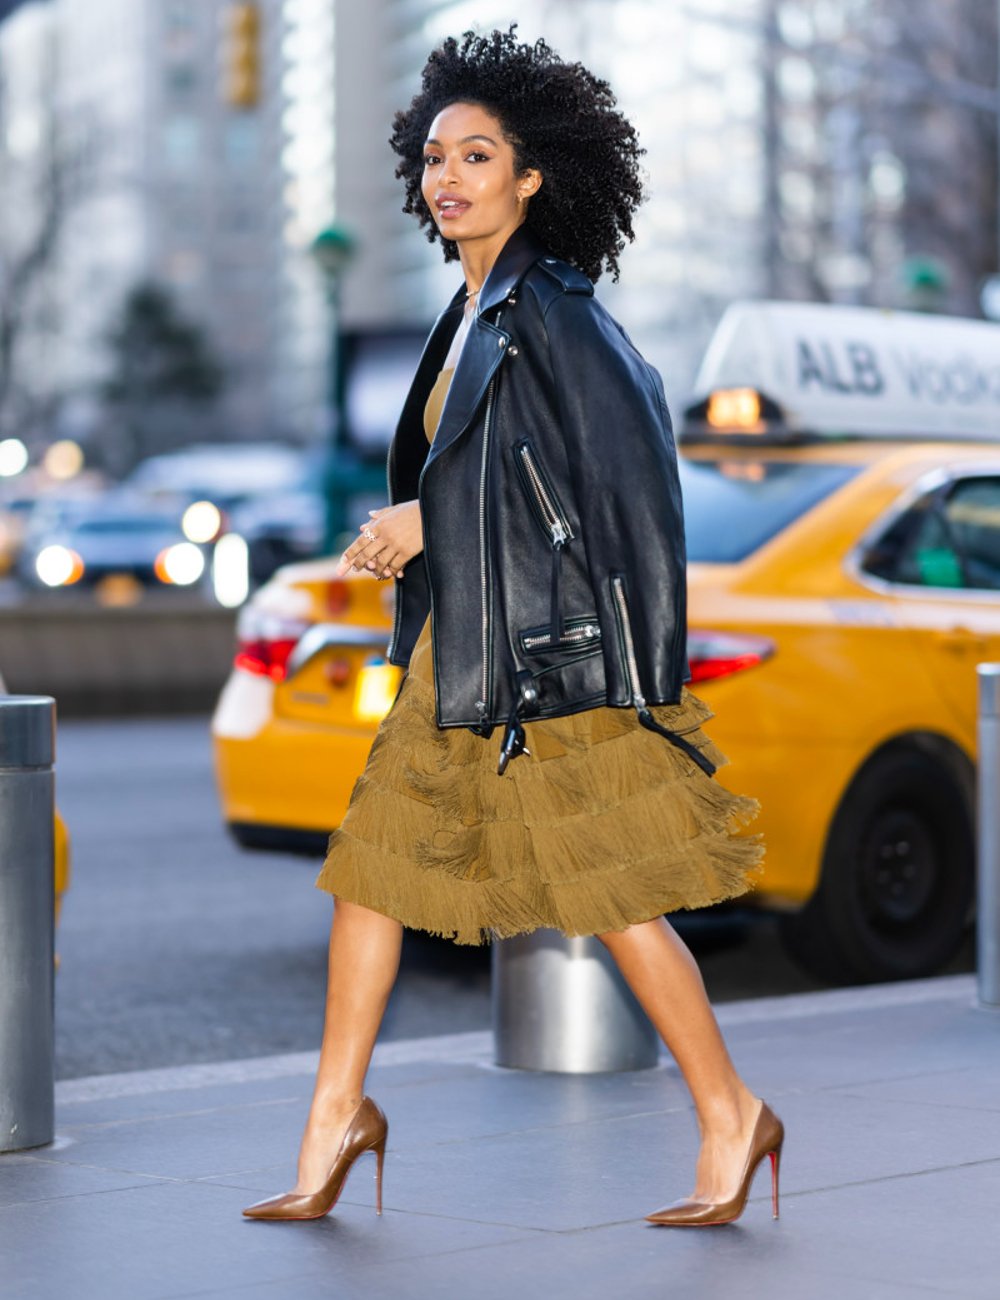 Yara Shahidi - Yara Shahidi - Yara Shahidi - inverno - street style - https://stealthelook.com.br